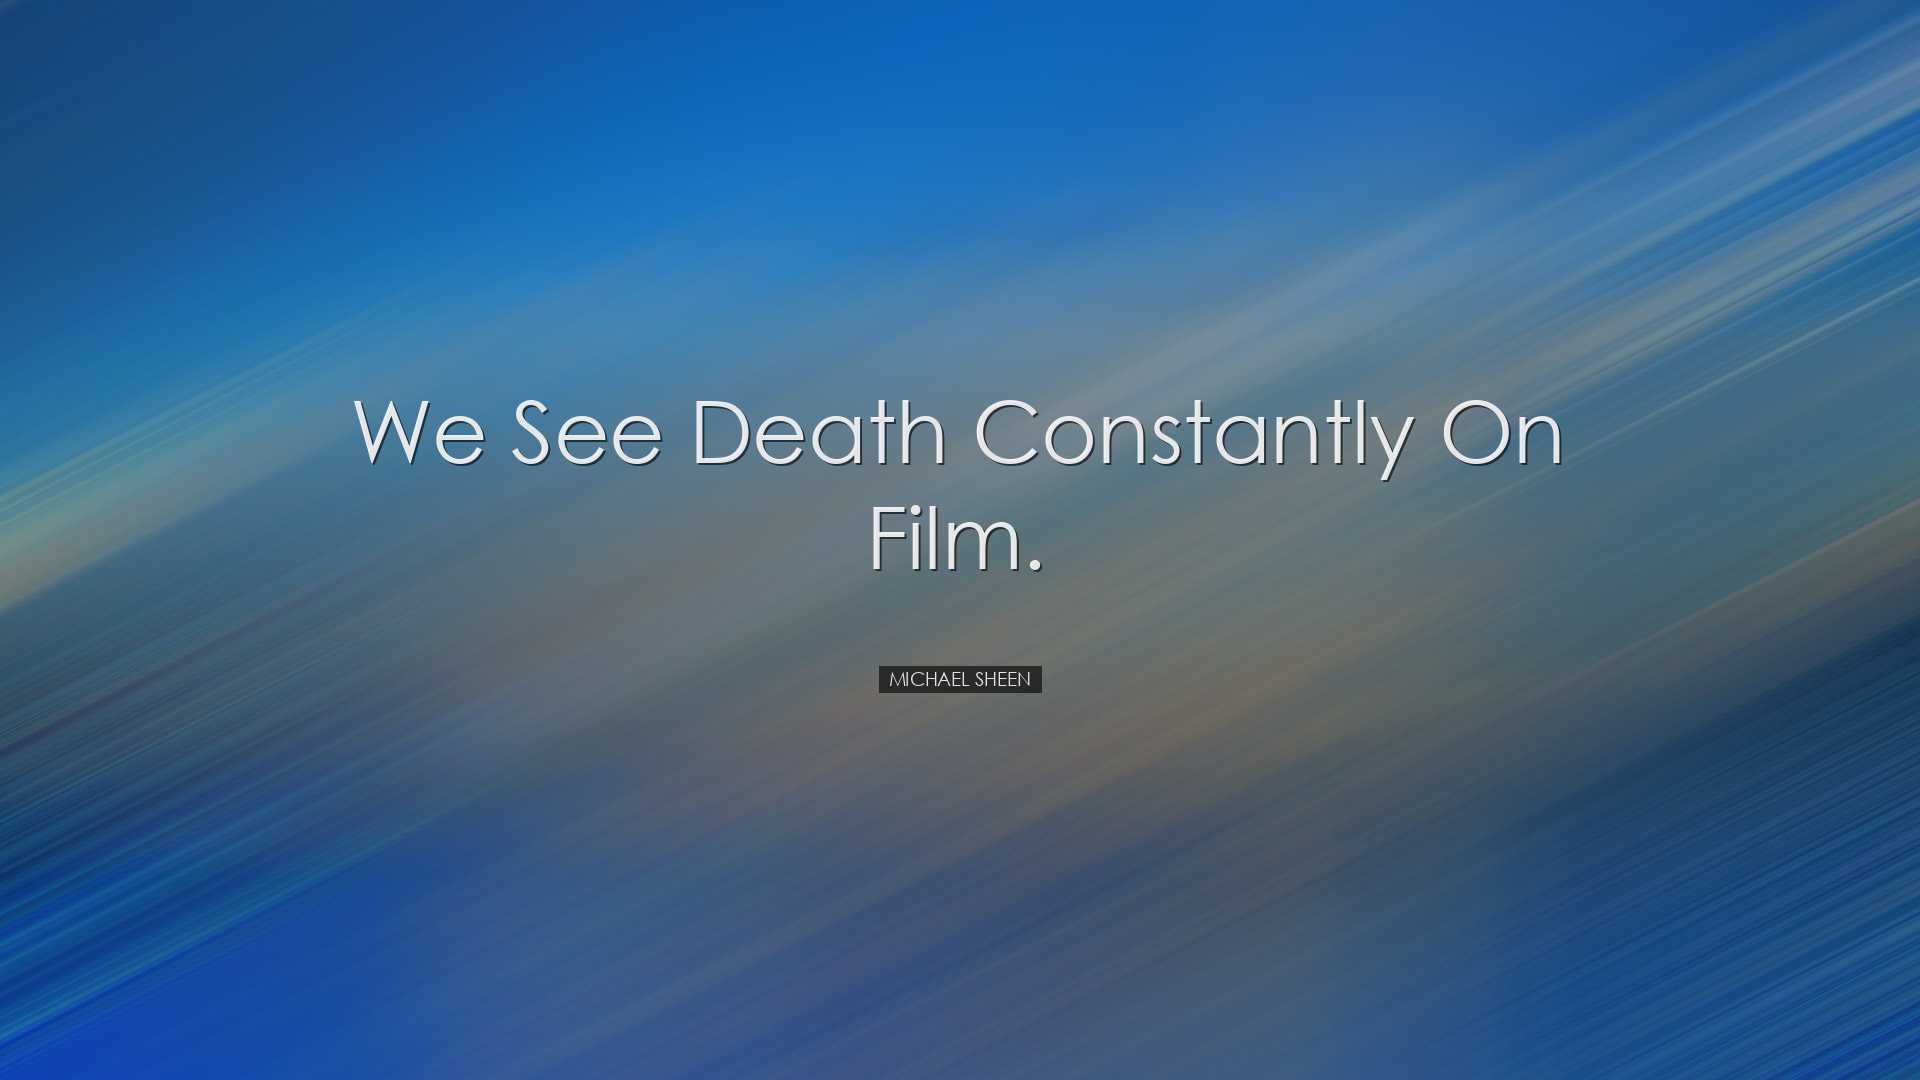 We see death constantly on film. - Michael Sheen